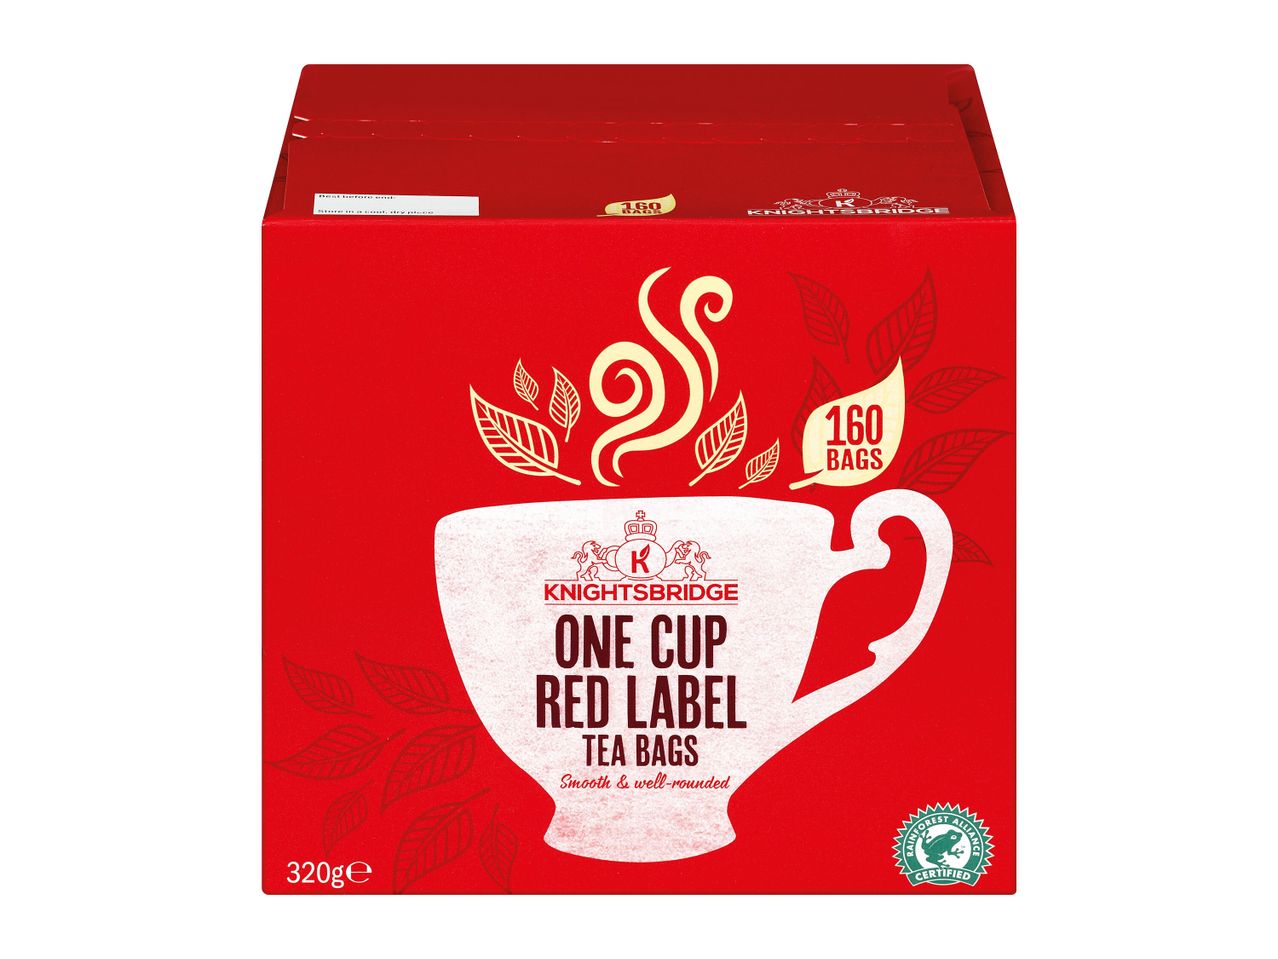 Go to full screen view: Knightsbridge One Cup Red Label Tea - Image 1